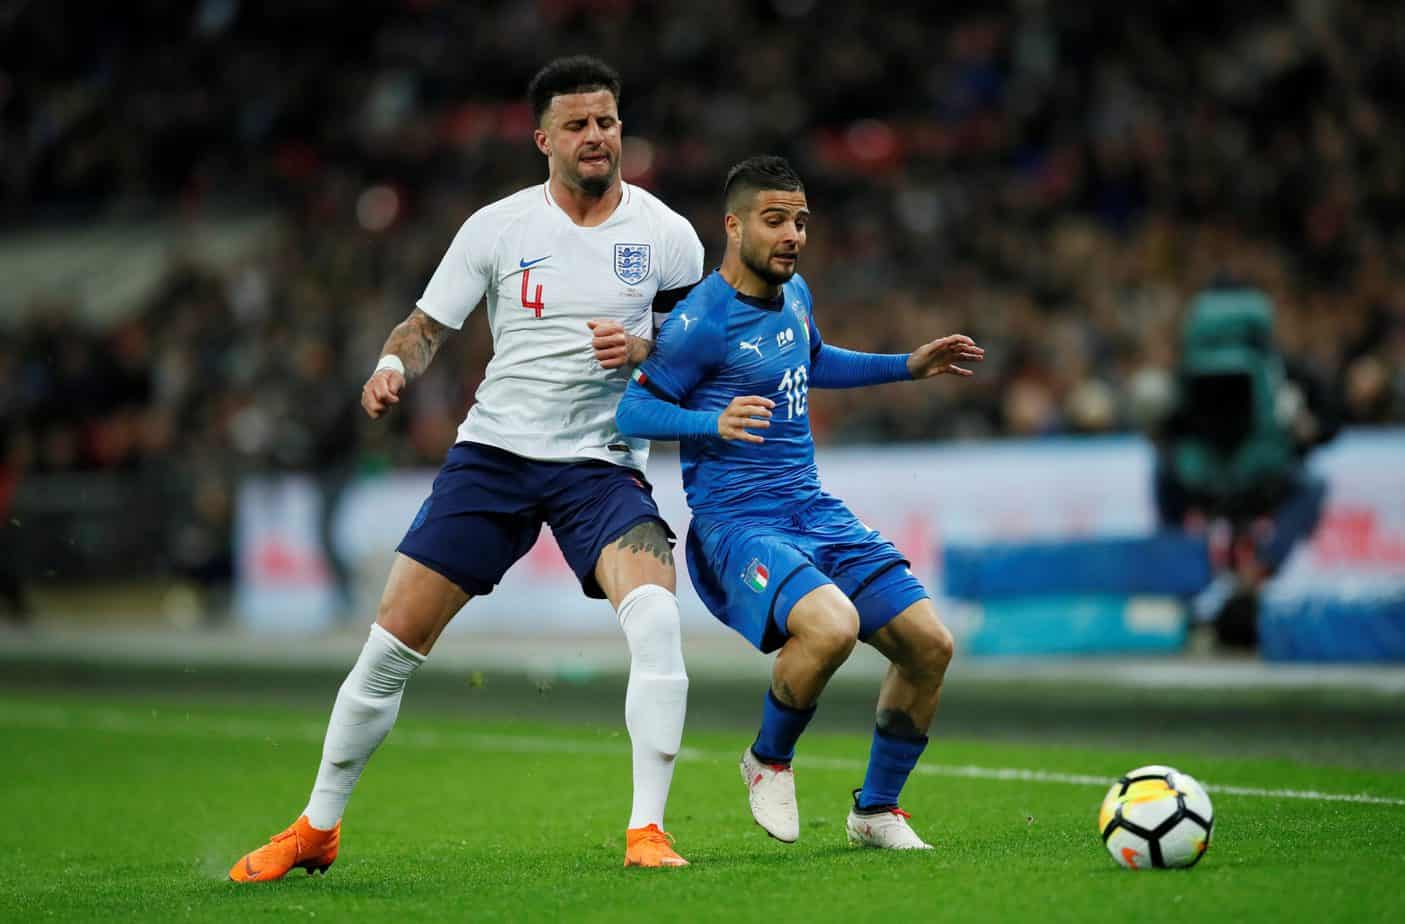 England vs. Italy Predictions and Preview